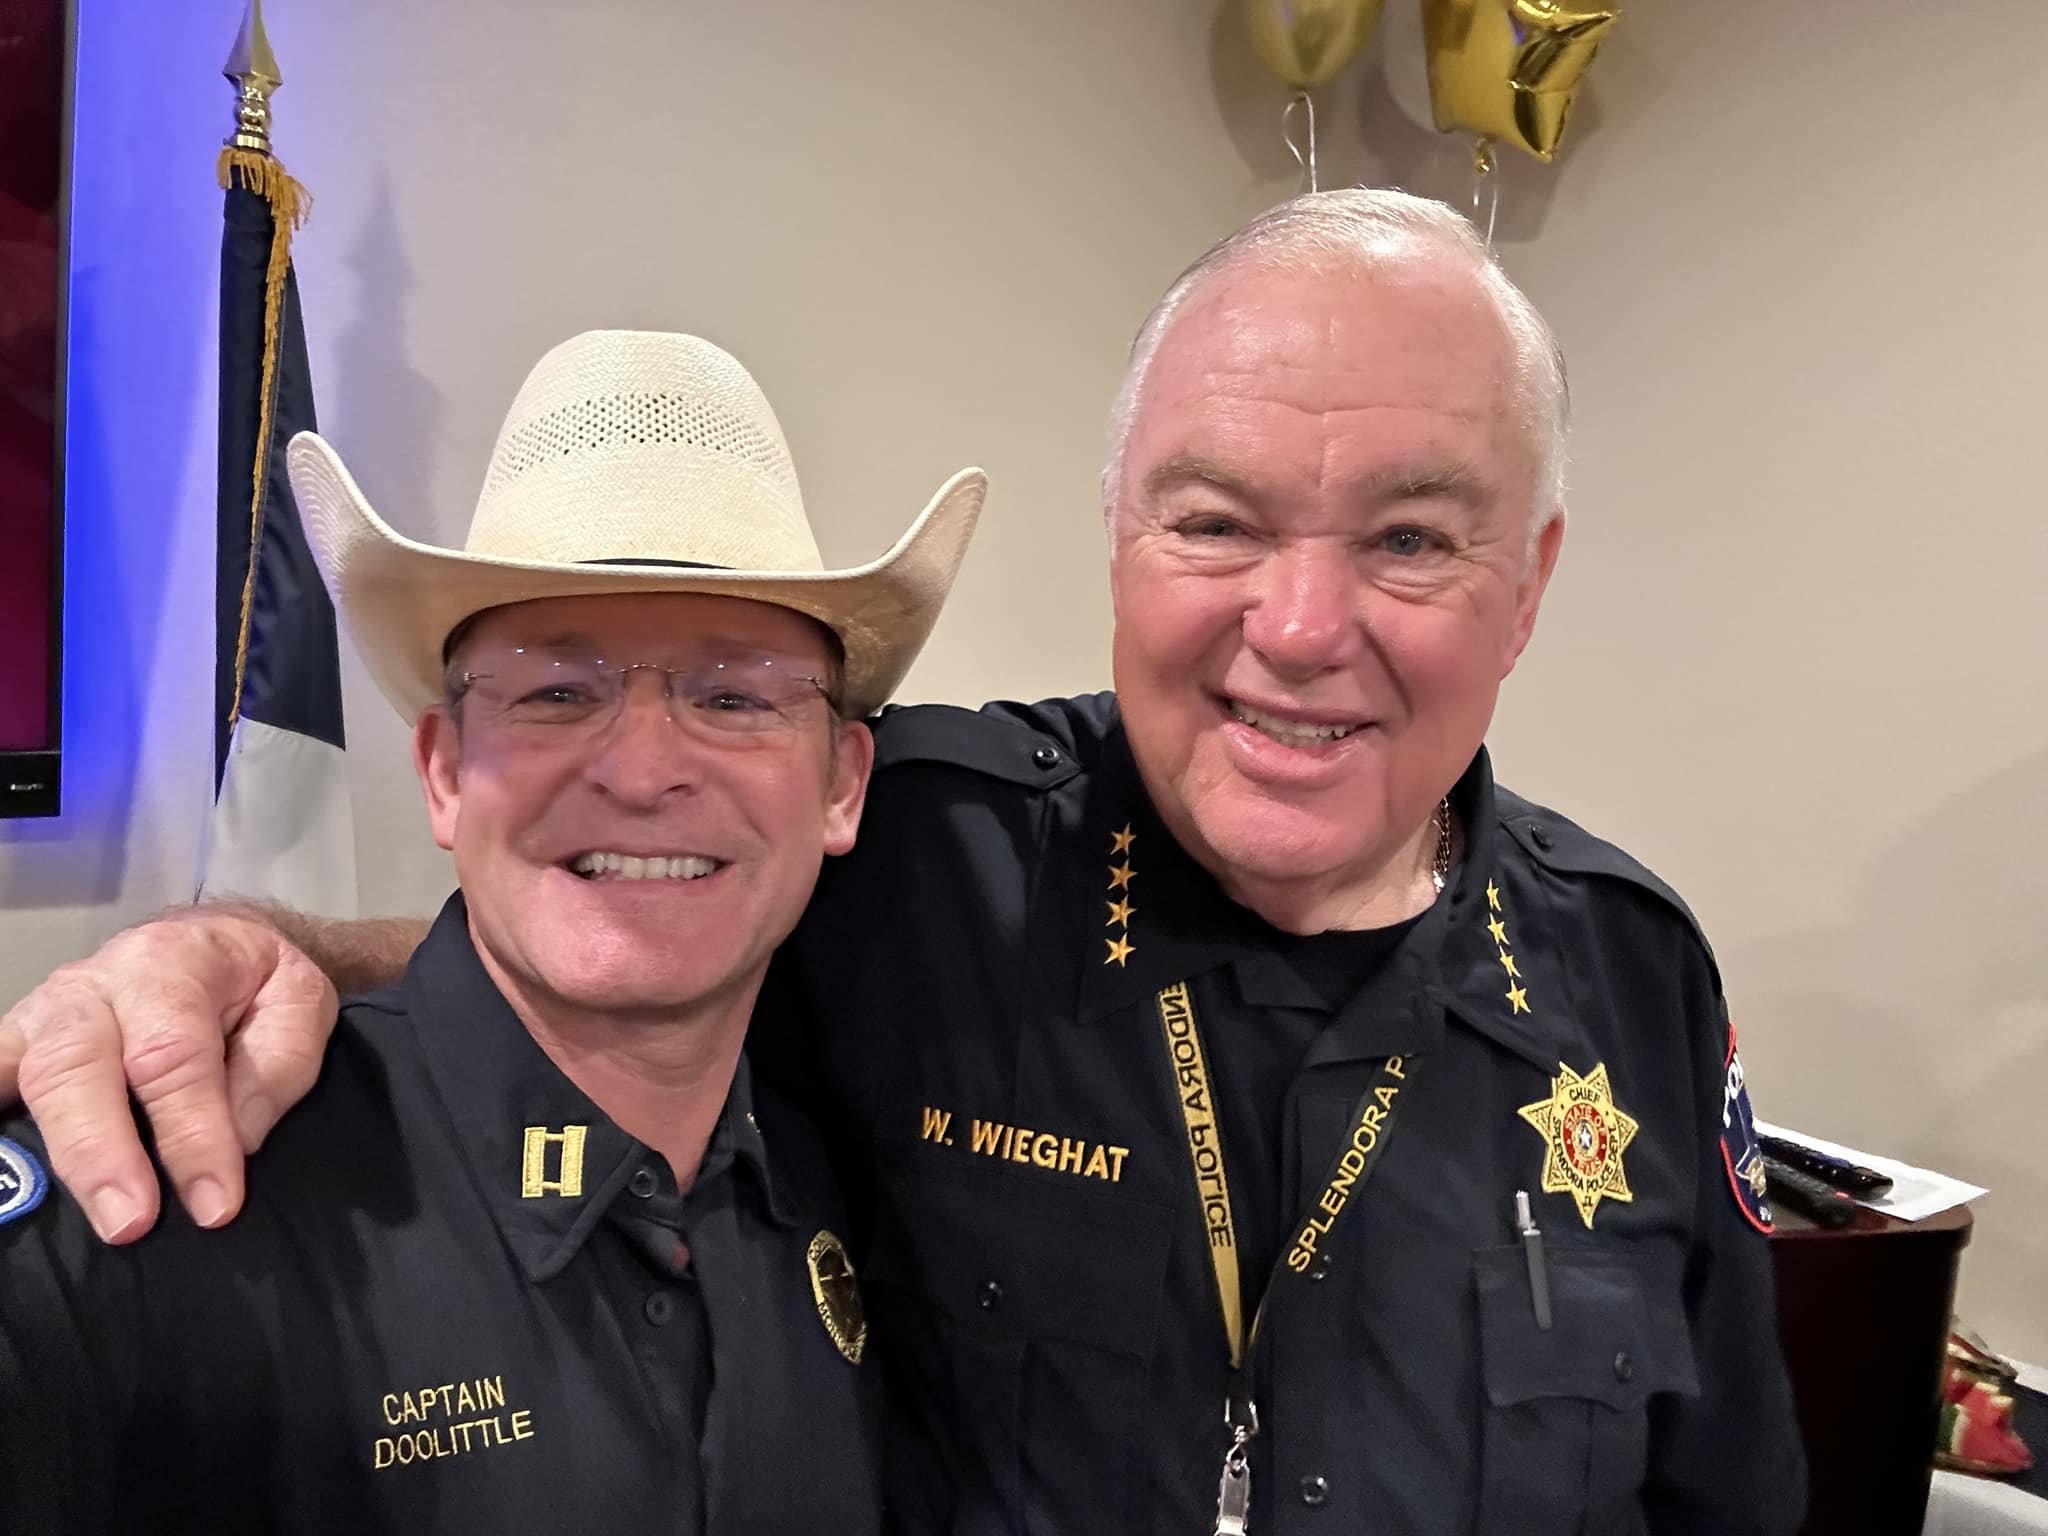 Yesterday, Splendora Chief Wally Wieghat celebrated 50 years of law enforcement service! An overwhelming number of good folks surprised Chief Wieghat at Splendora Police Department to honor his service. Wally and I have been friends for many years an